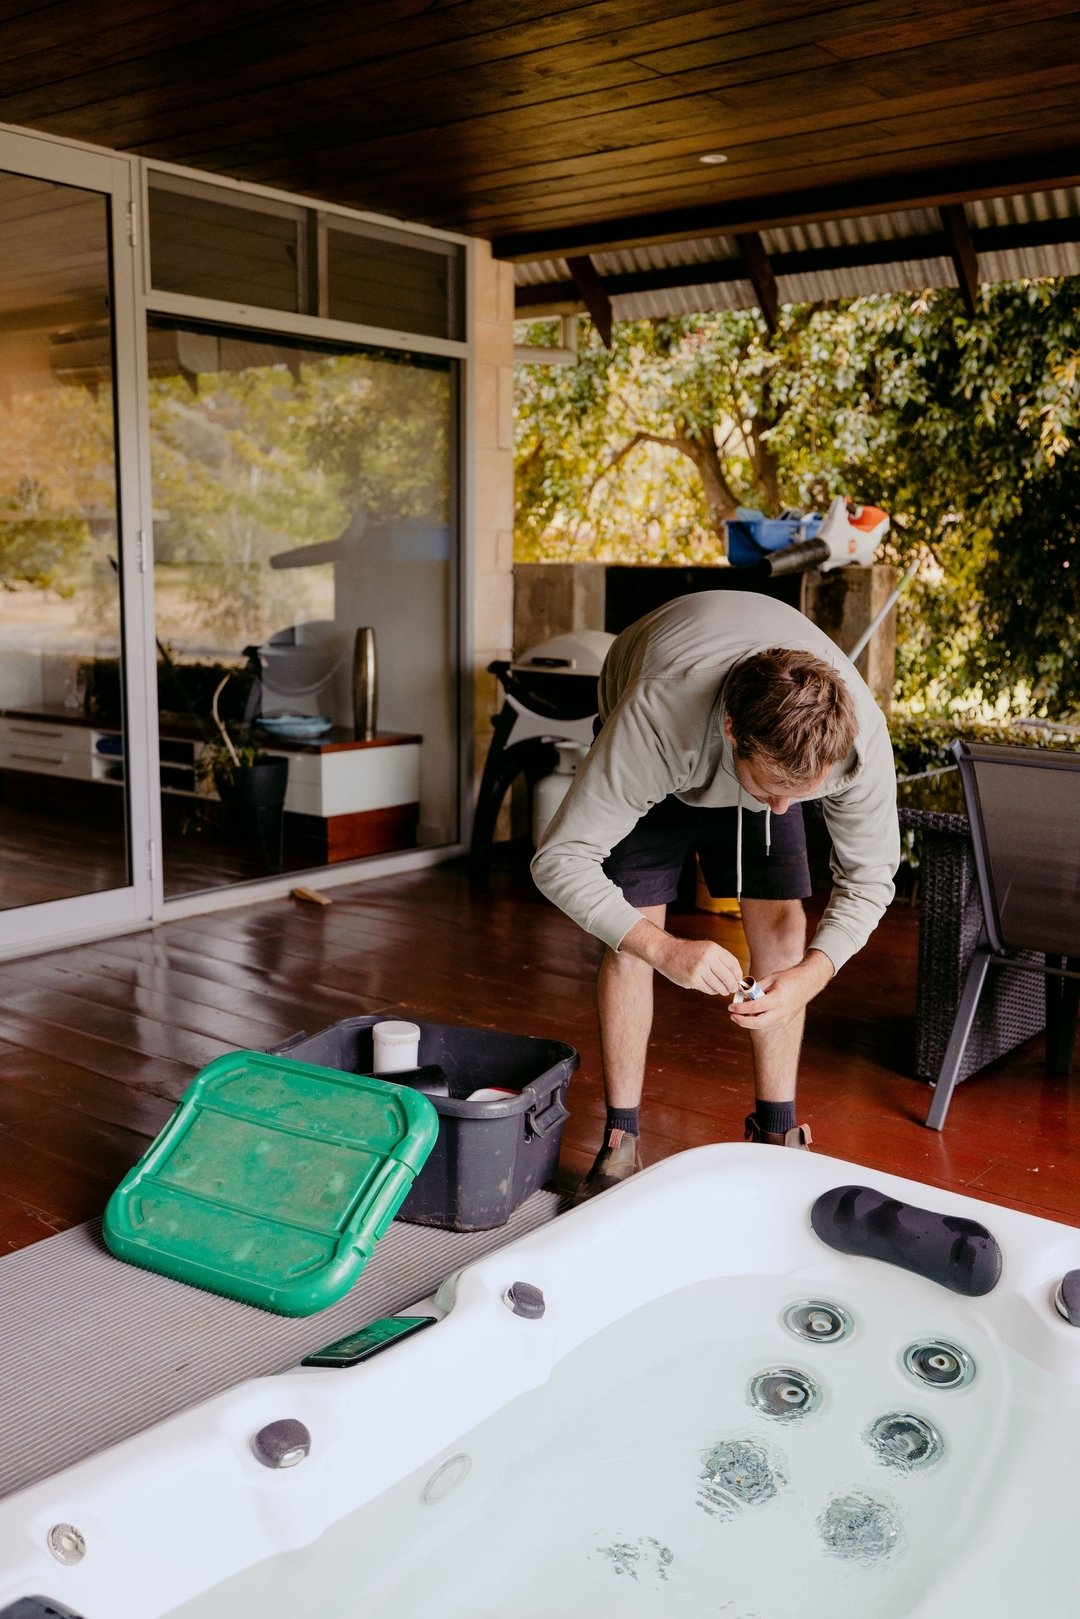 BTS 📸 📸 We managed to get a snap of Ben in action, cleaning and testing one of our lakehouse villa spas!

Each spa is cleaned and tested thoroughly before your arrival, guaranteeing the perfect conditions for you to slip right in.